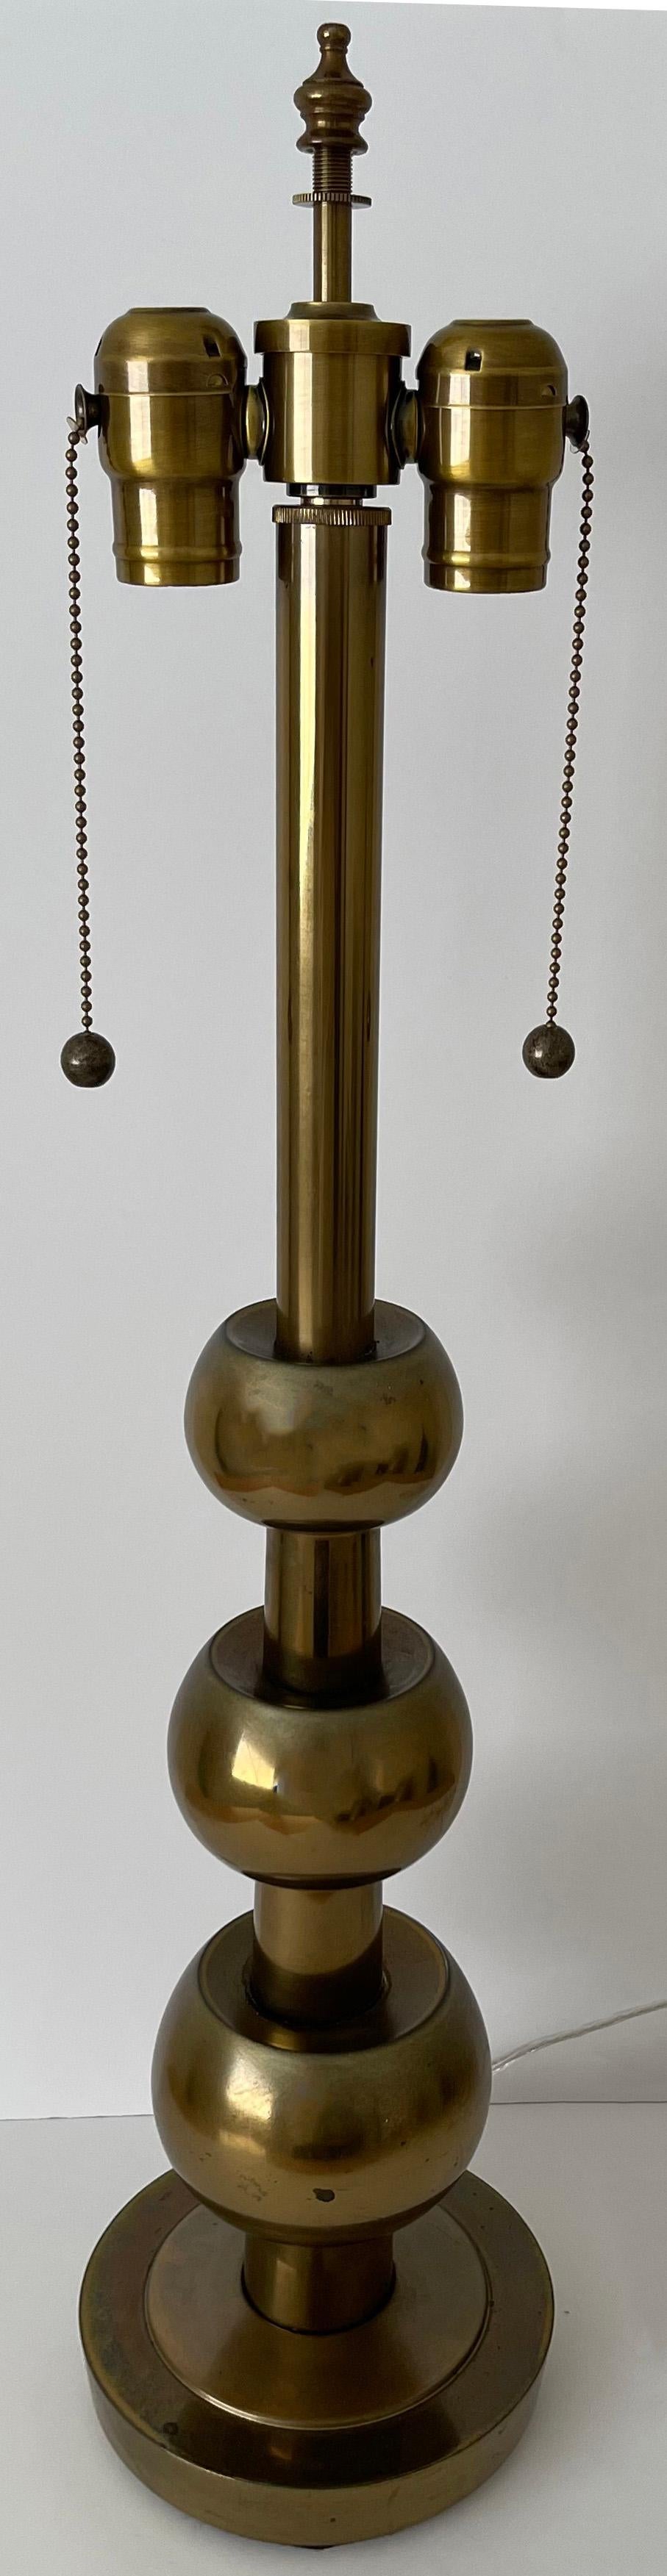 Mid-century brass Stiffel lamp in the style of Tommi Parzjnger. Stacked brass ball style with overall unpolished patina. Lamp is newly rewired with new double socket. Lamp takes 2 standard bulbs (not included). Lampshade is not included. Brass